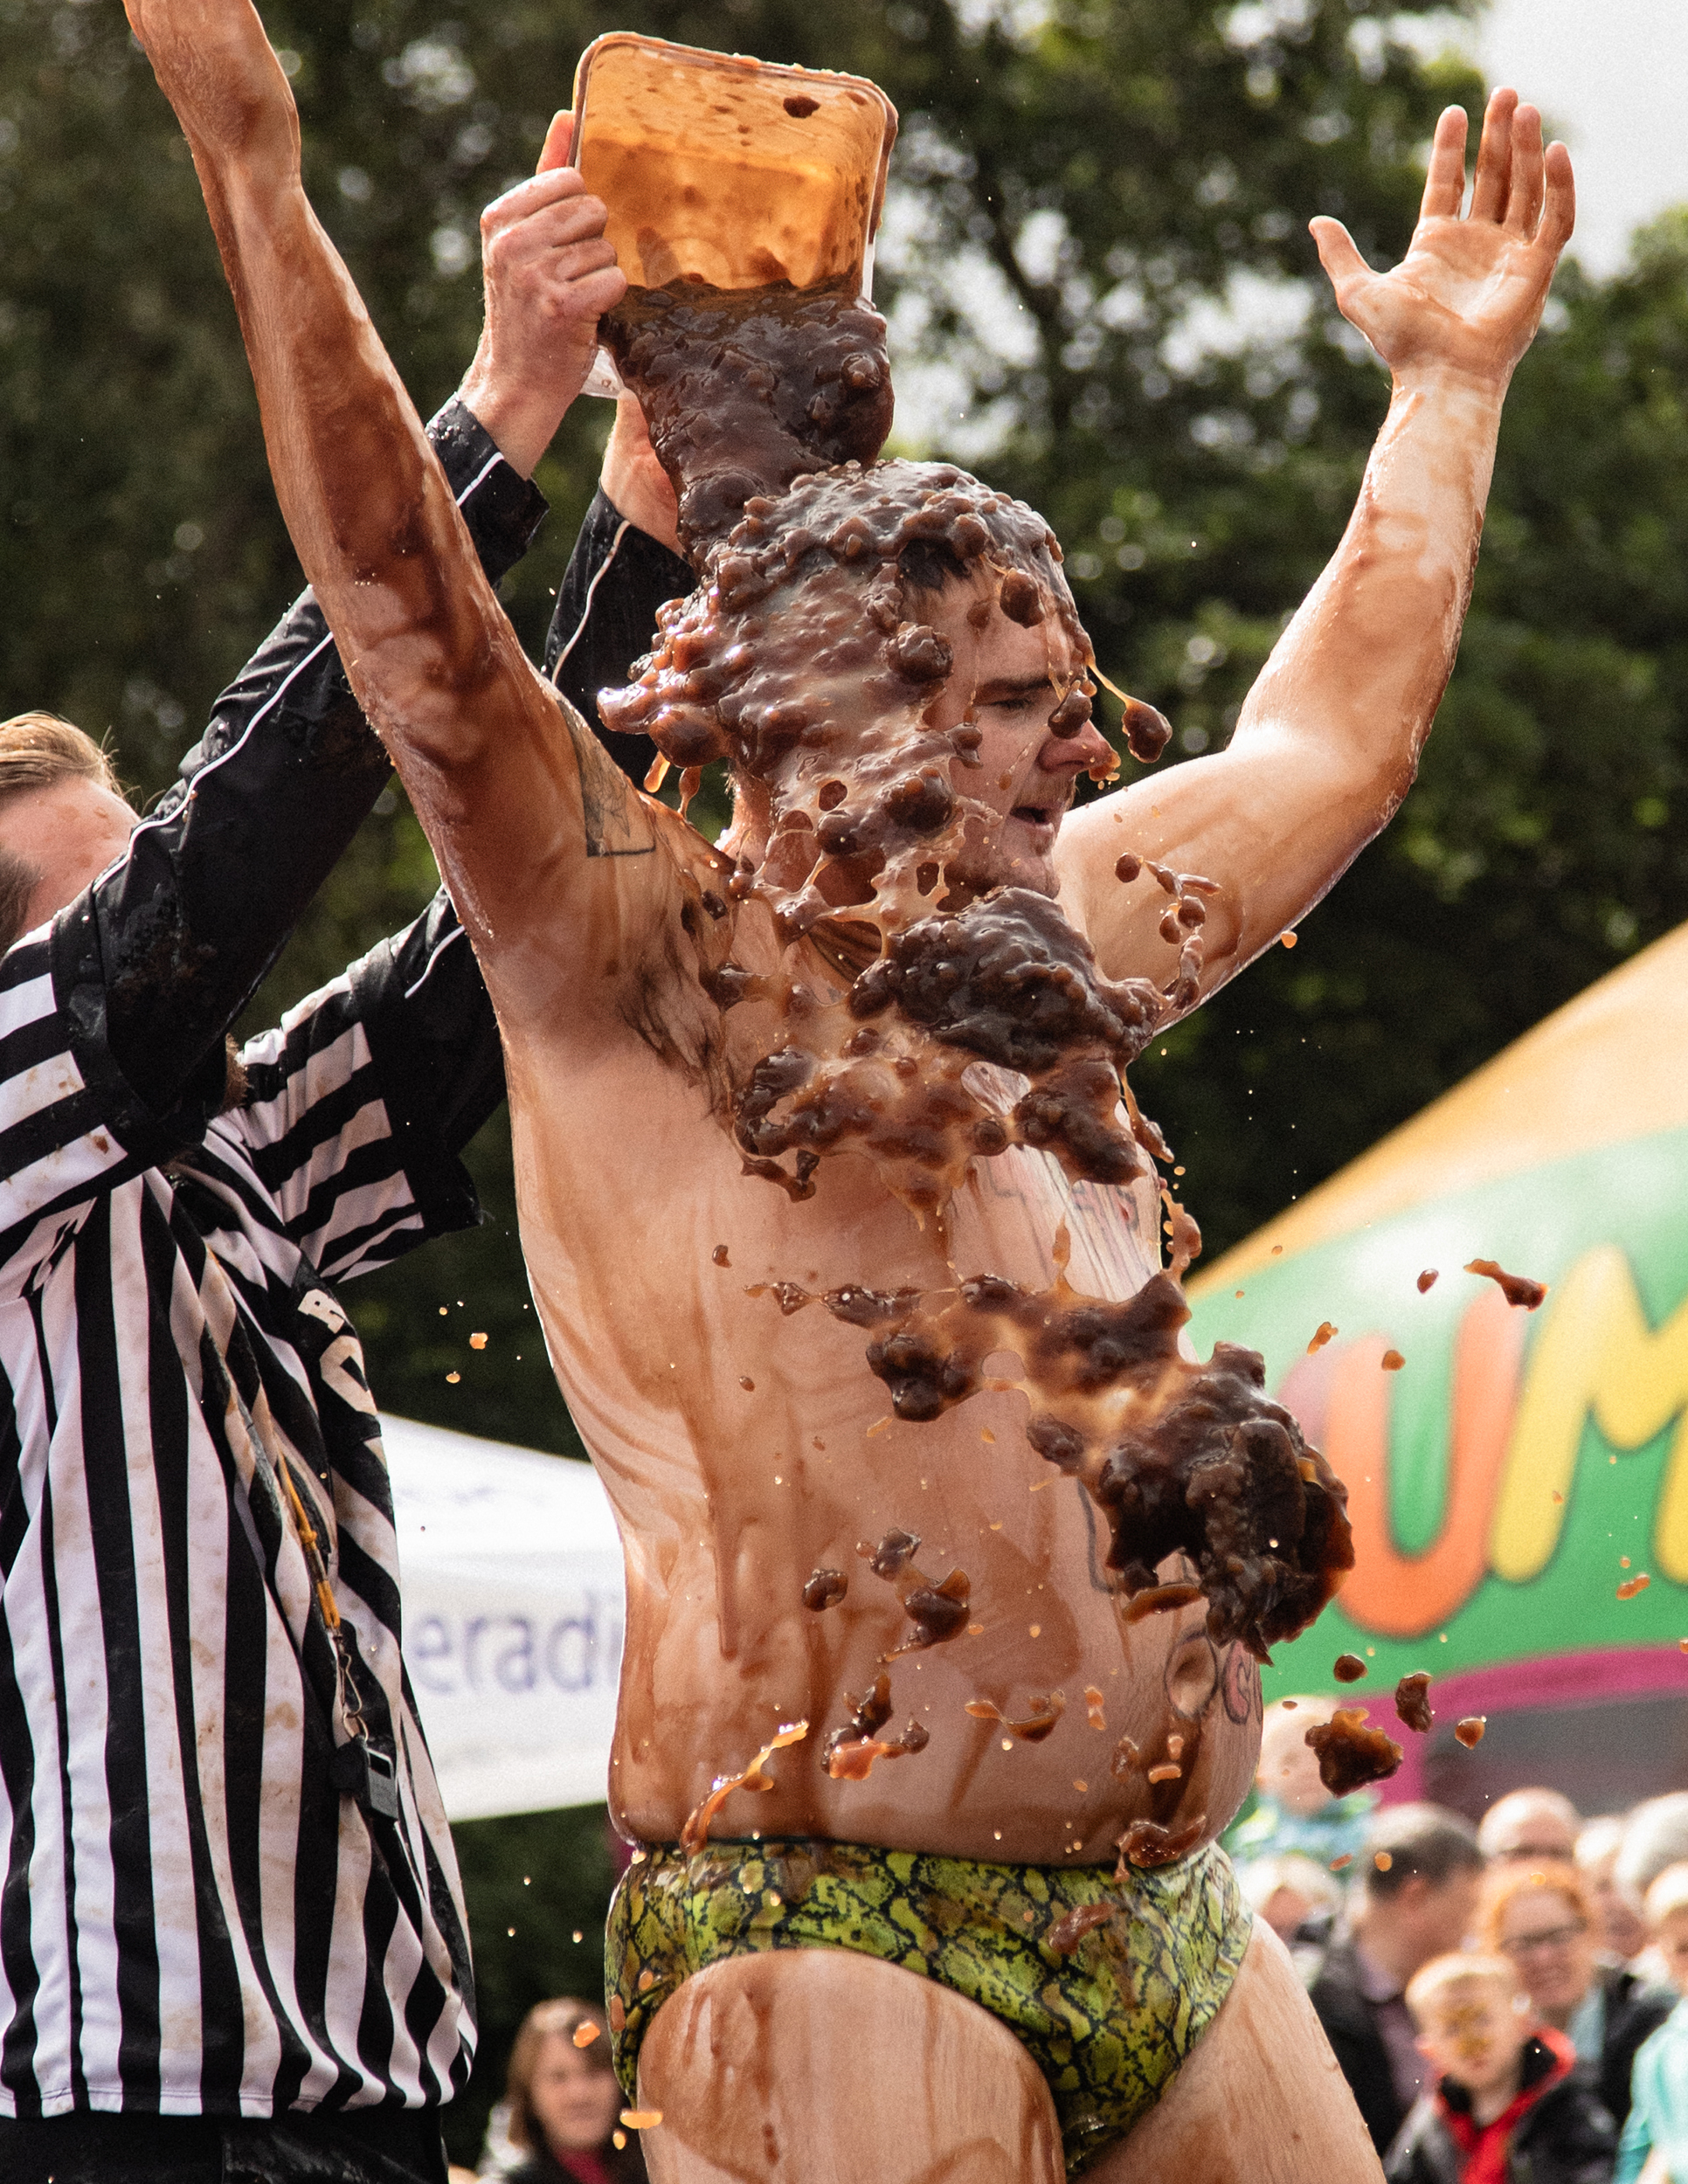 world gravy championships - a photo of a man in budgy smugglers getting covered in gravy.